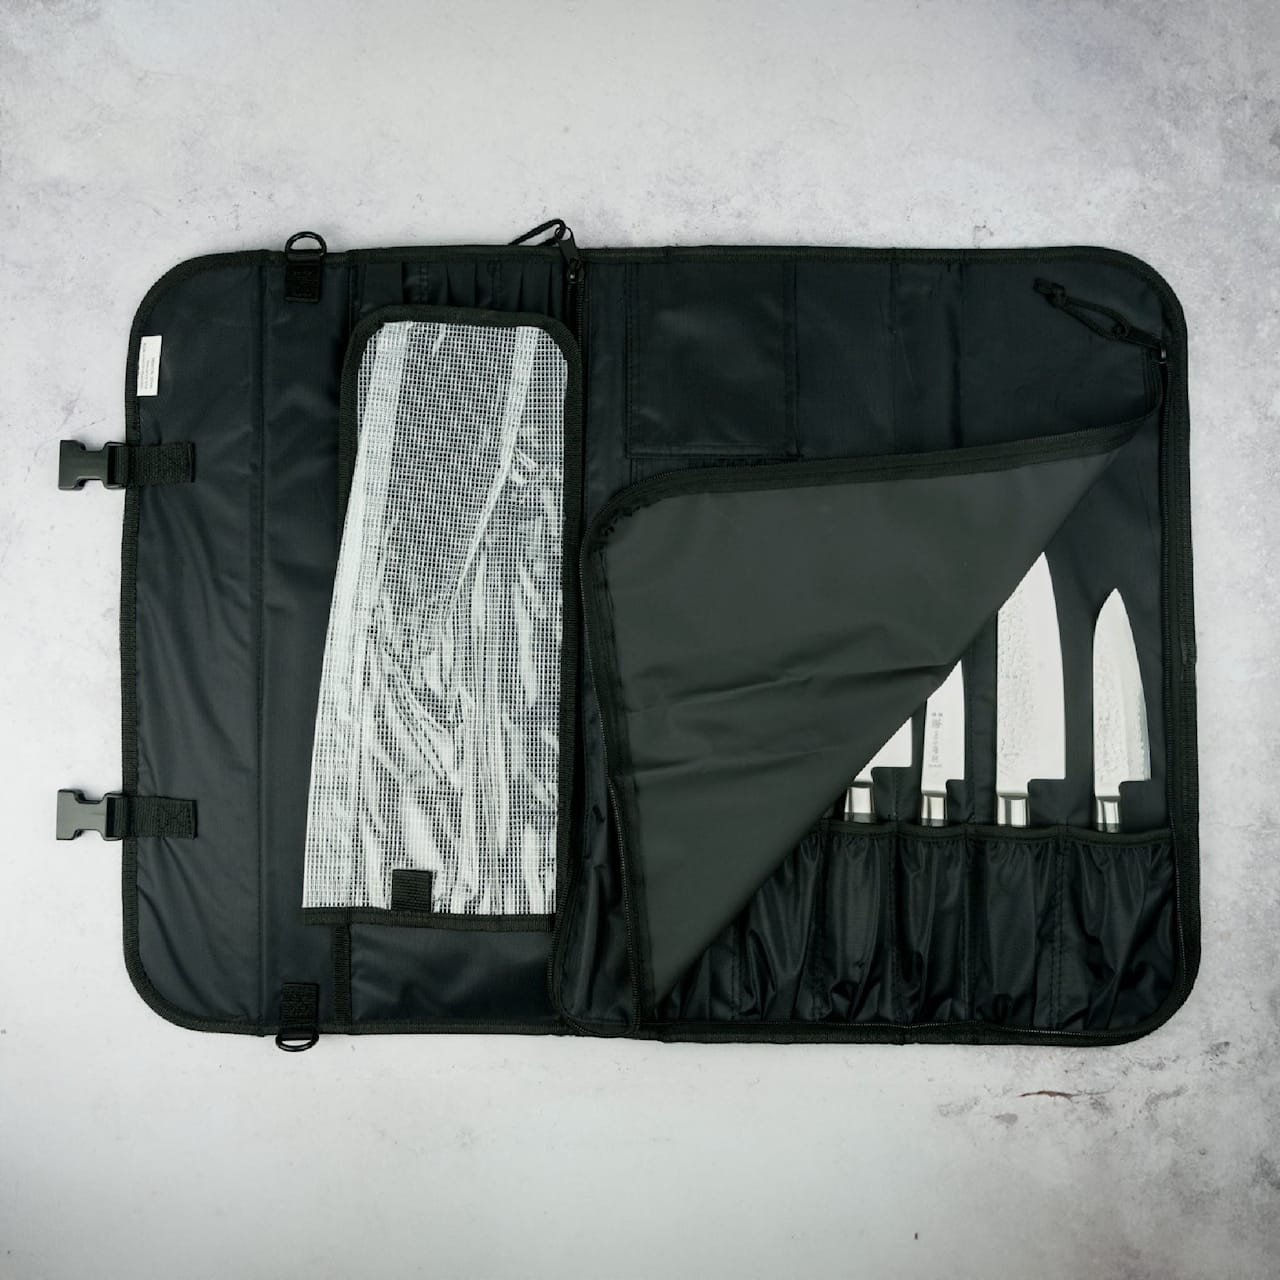 Yaxell Knife Bag For 10 Knives